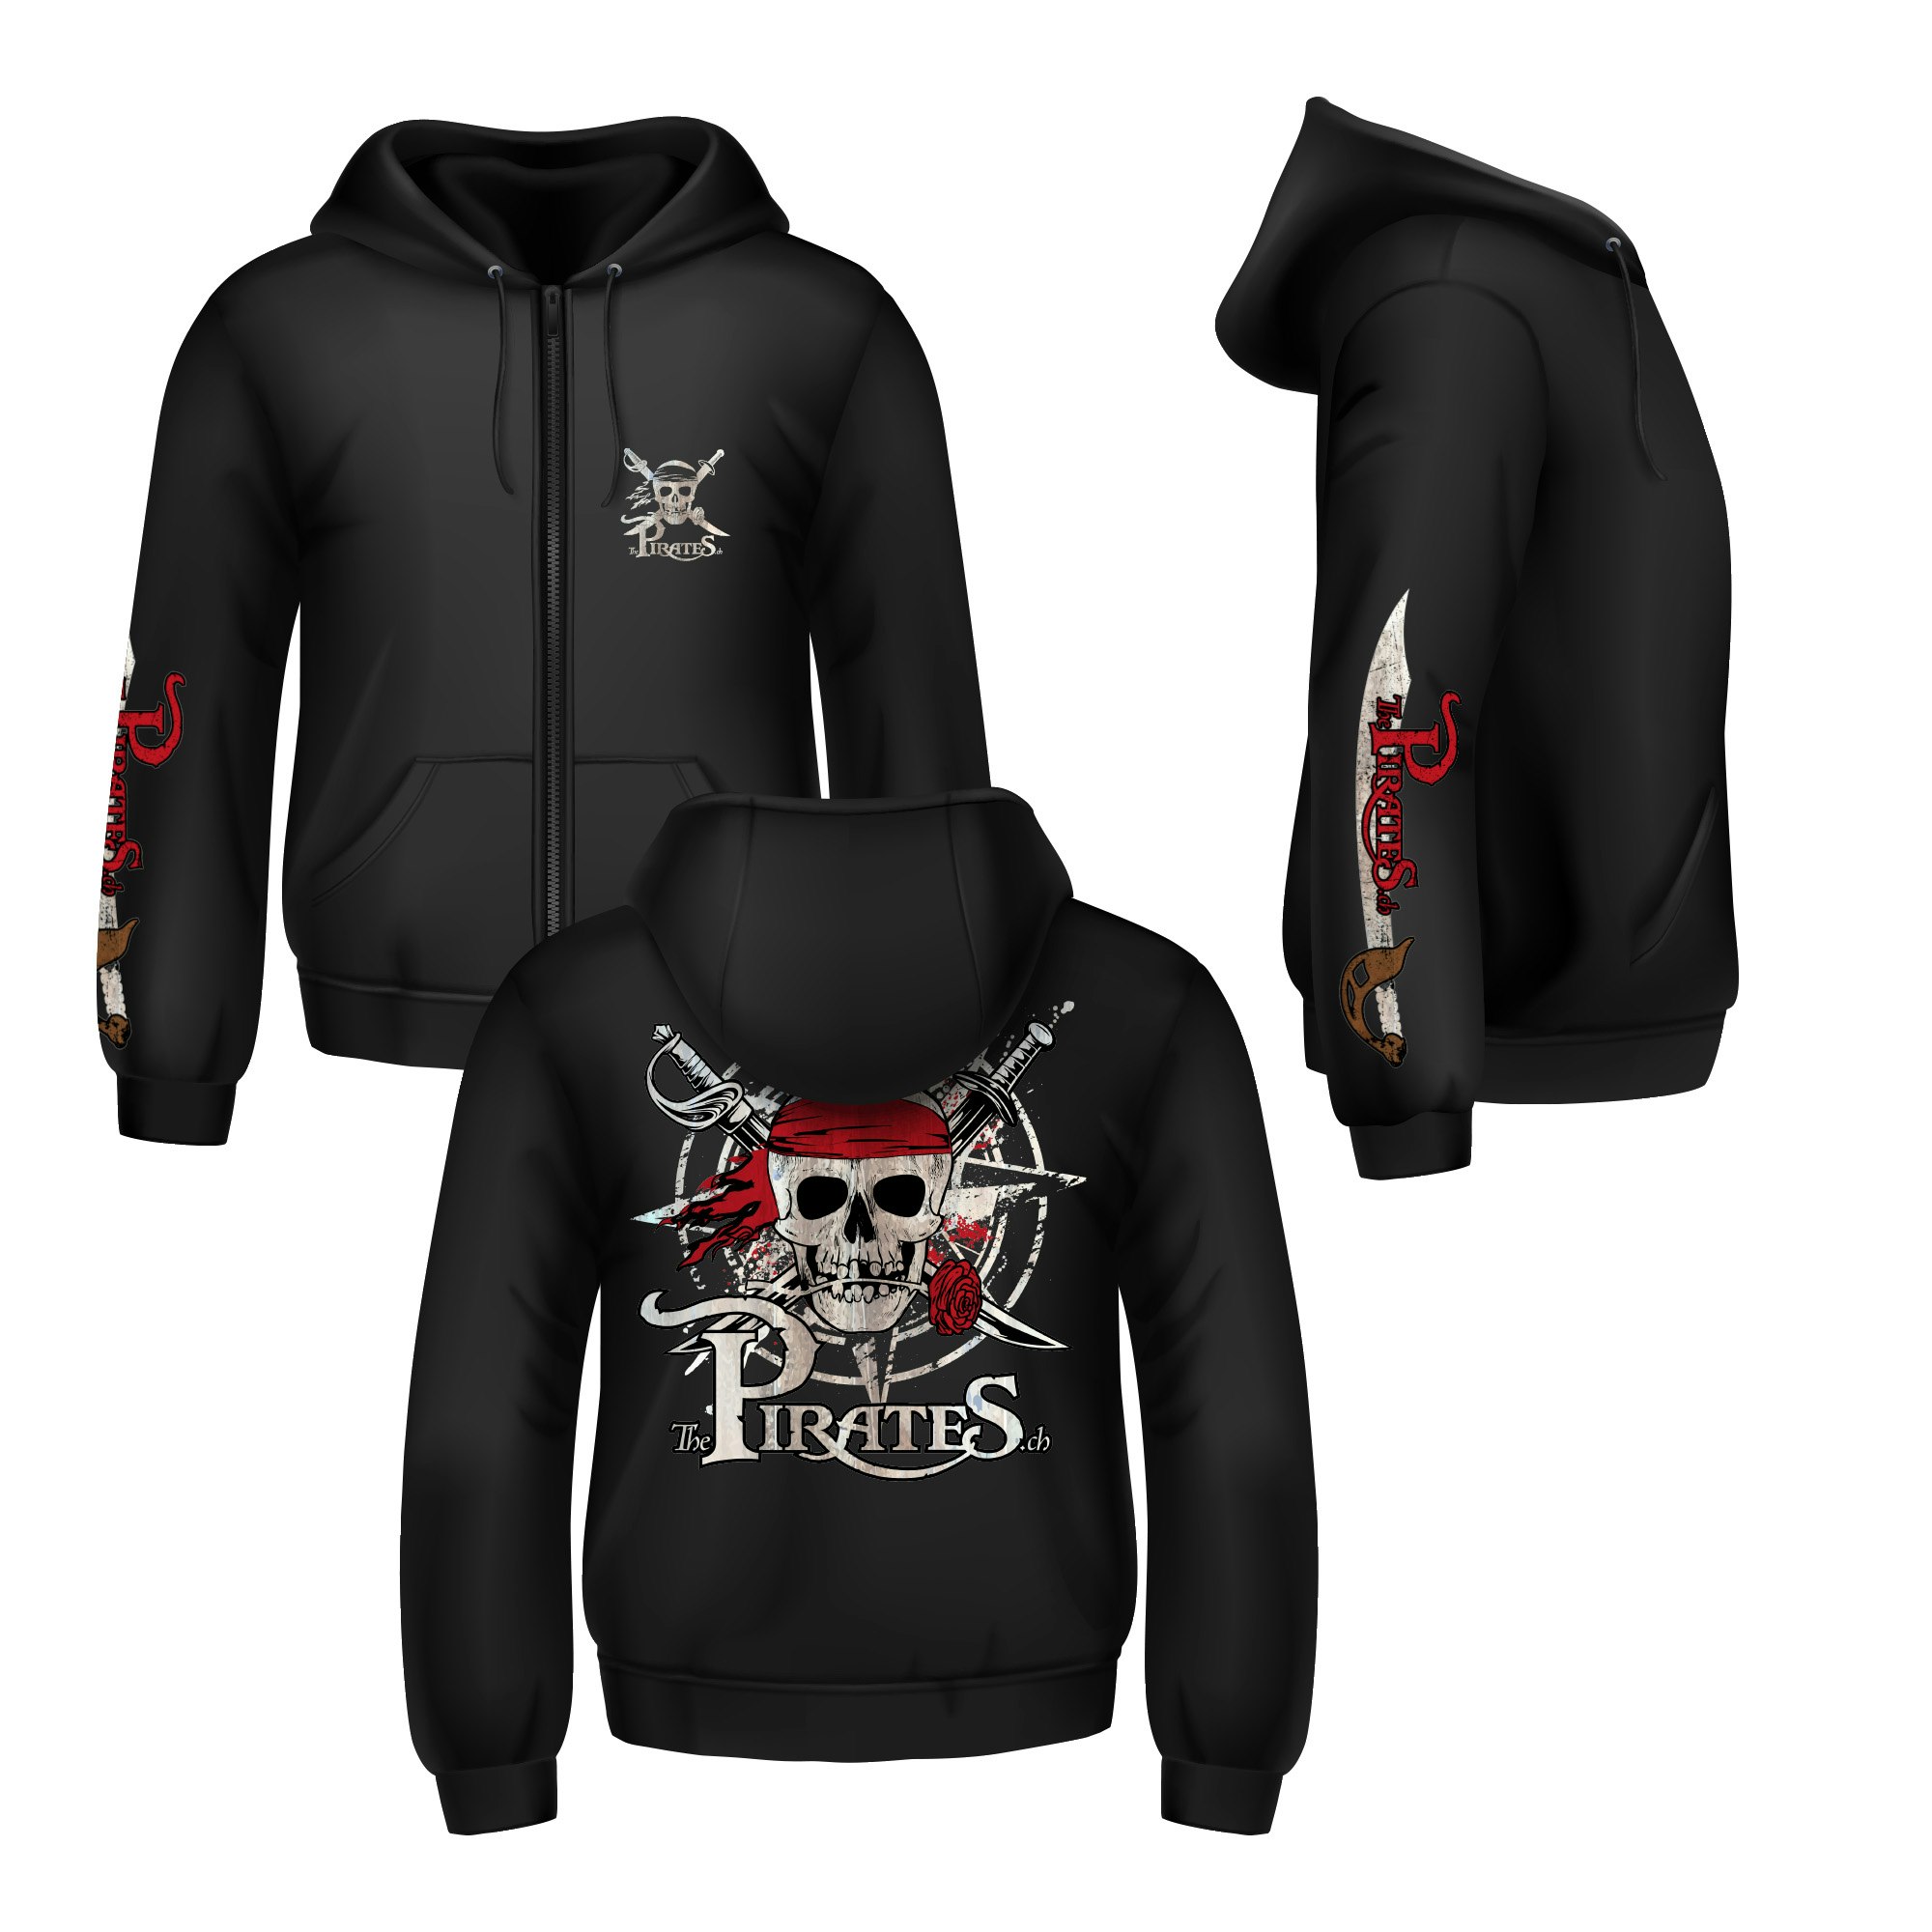 The Pirates Hoodie